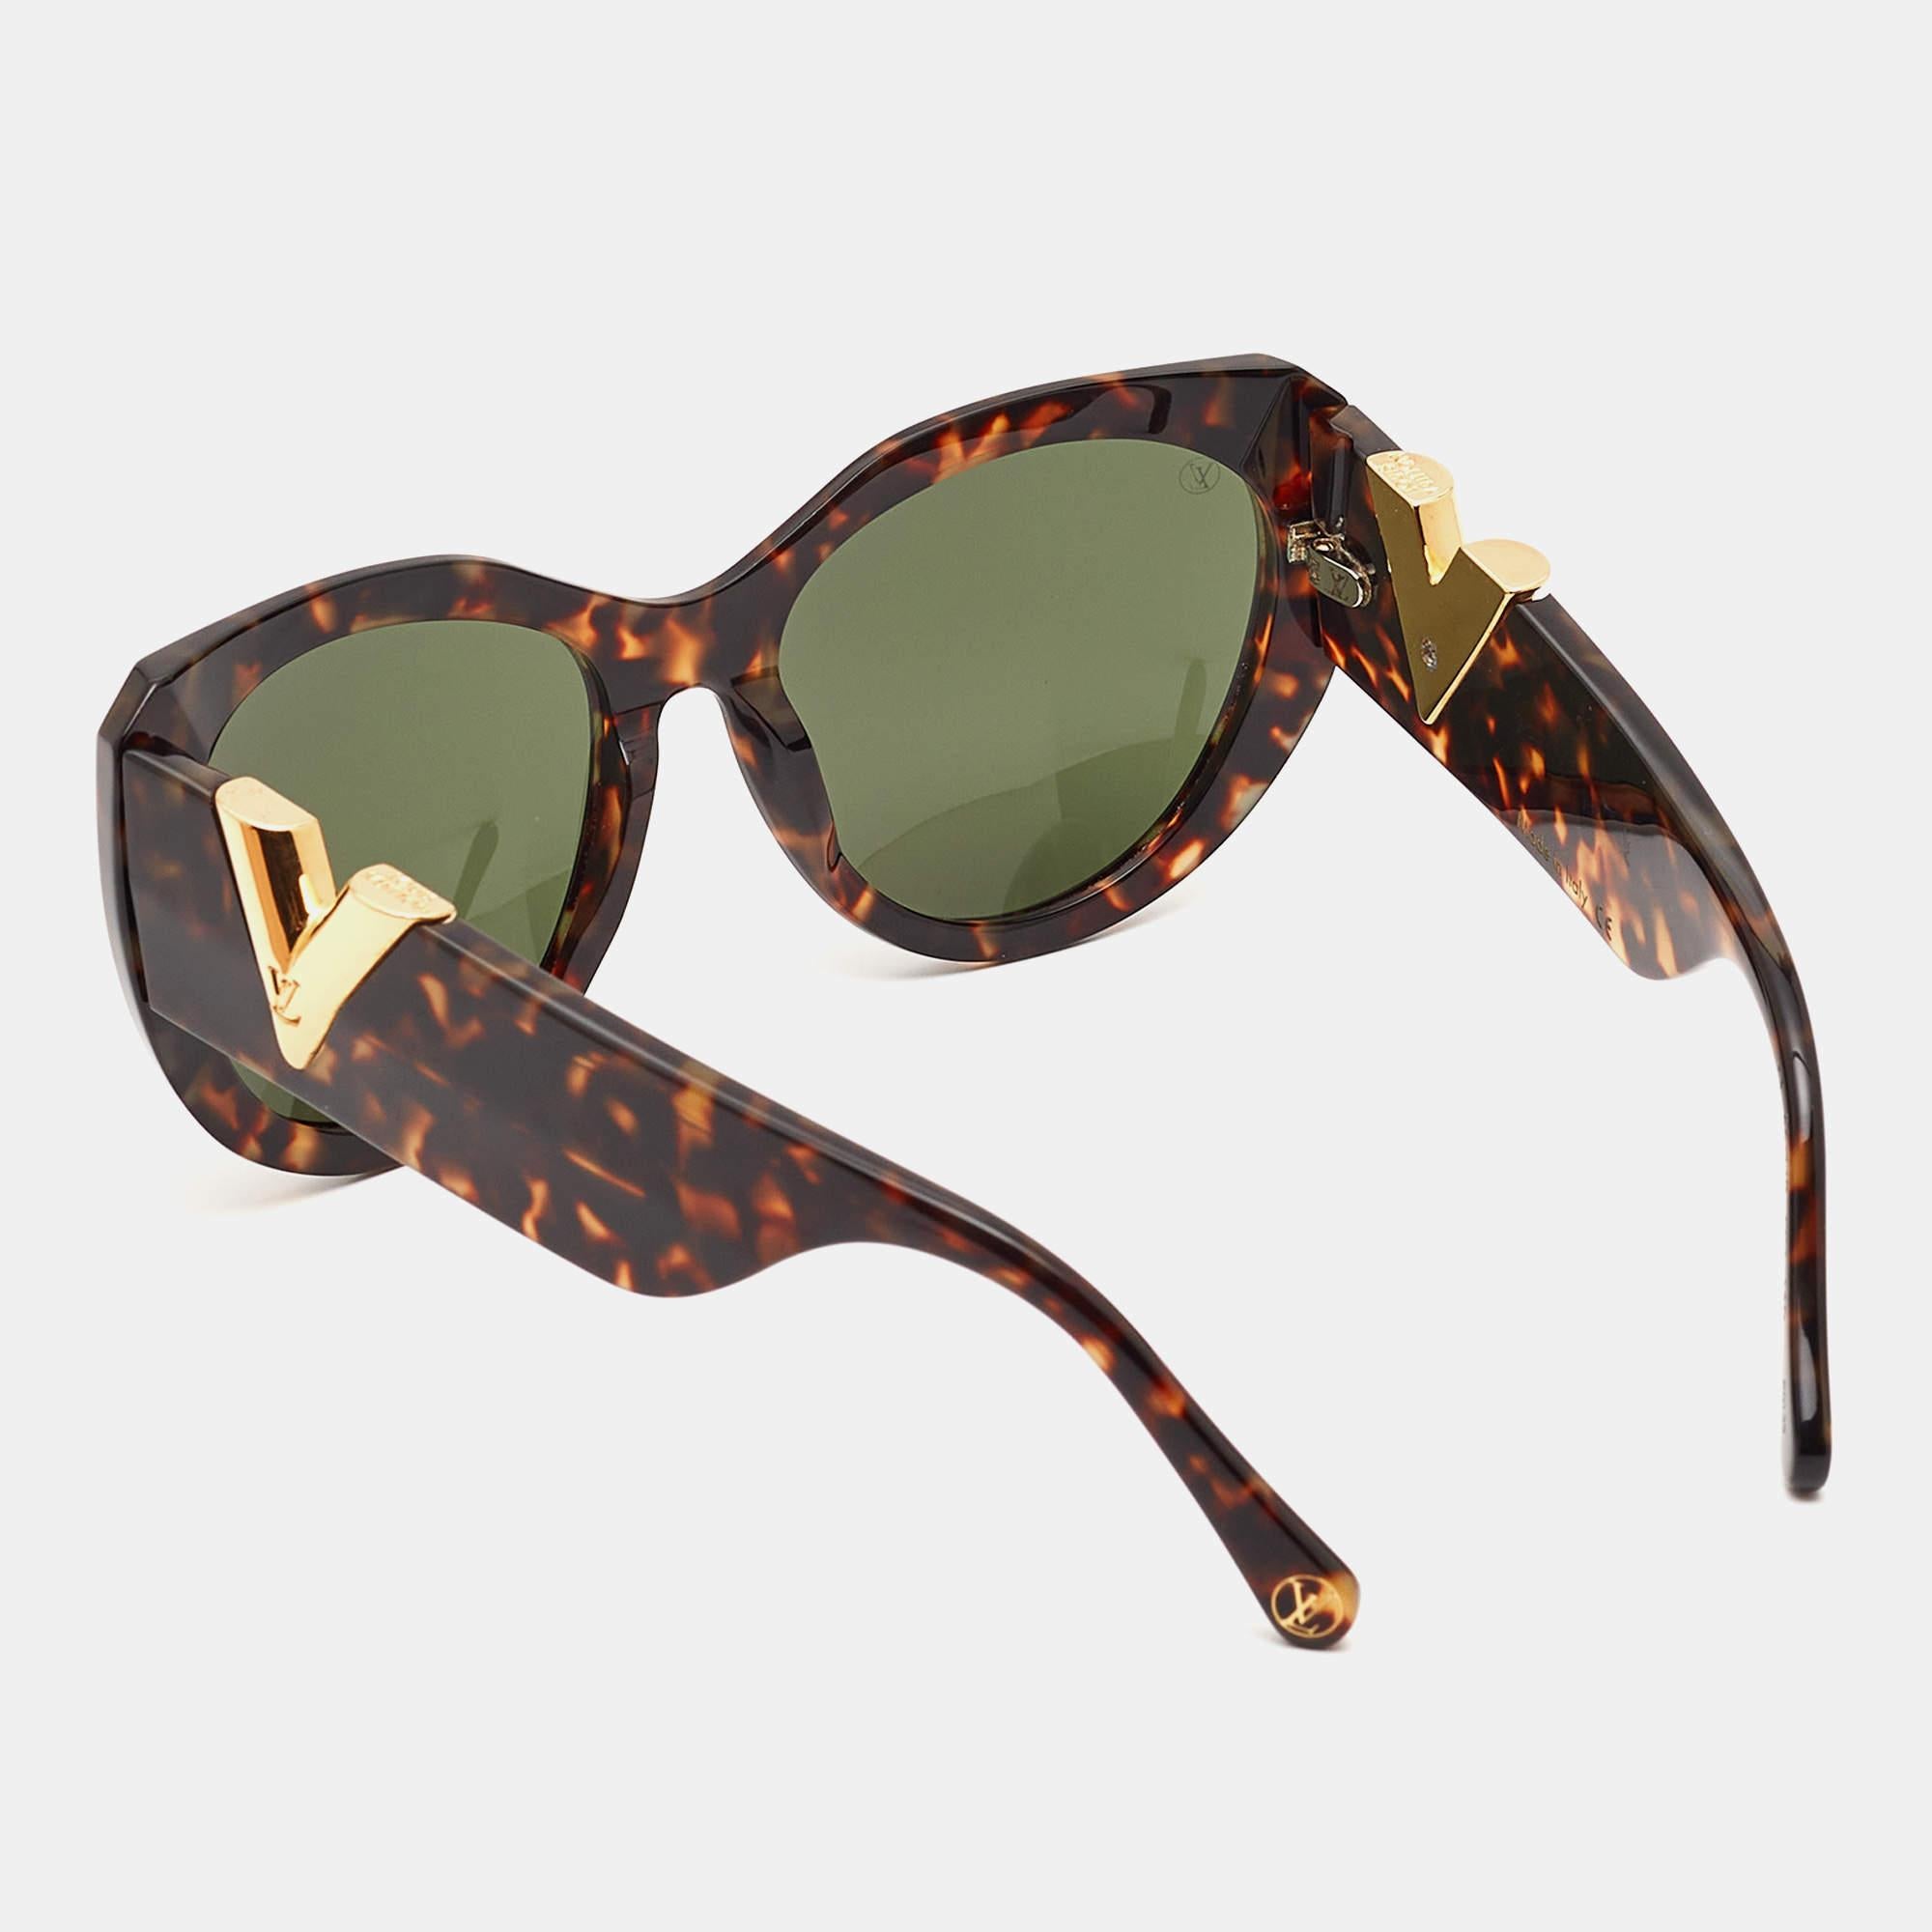 Elevate your eyewear game with these Louis Vuitton brown sunglasses. Meticulously crafted from premium materials, they offer unparalleled UV protection and a timeless design, making them a must-have accessory for the fashion-forward.

Includes: